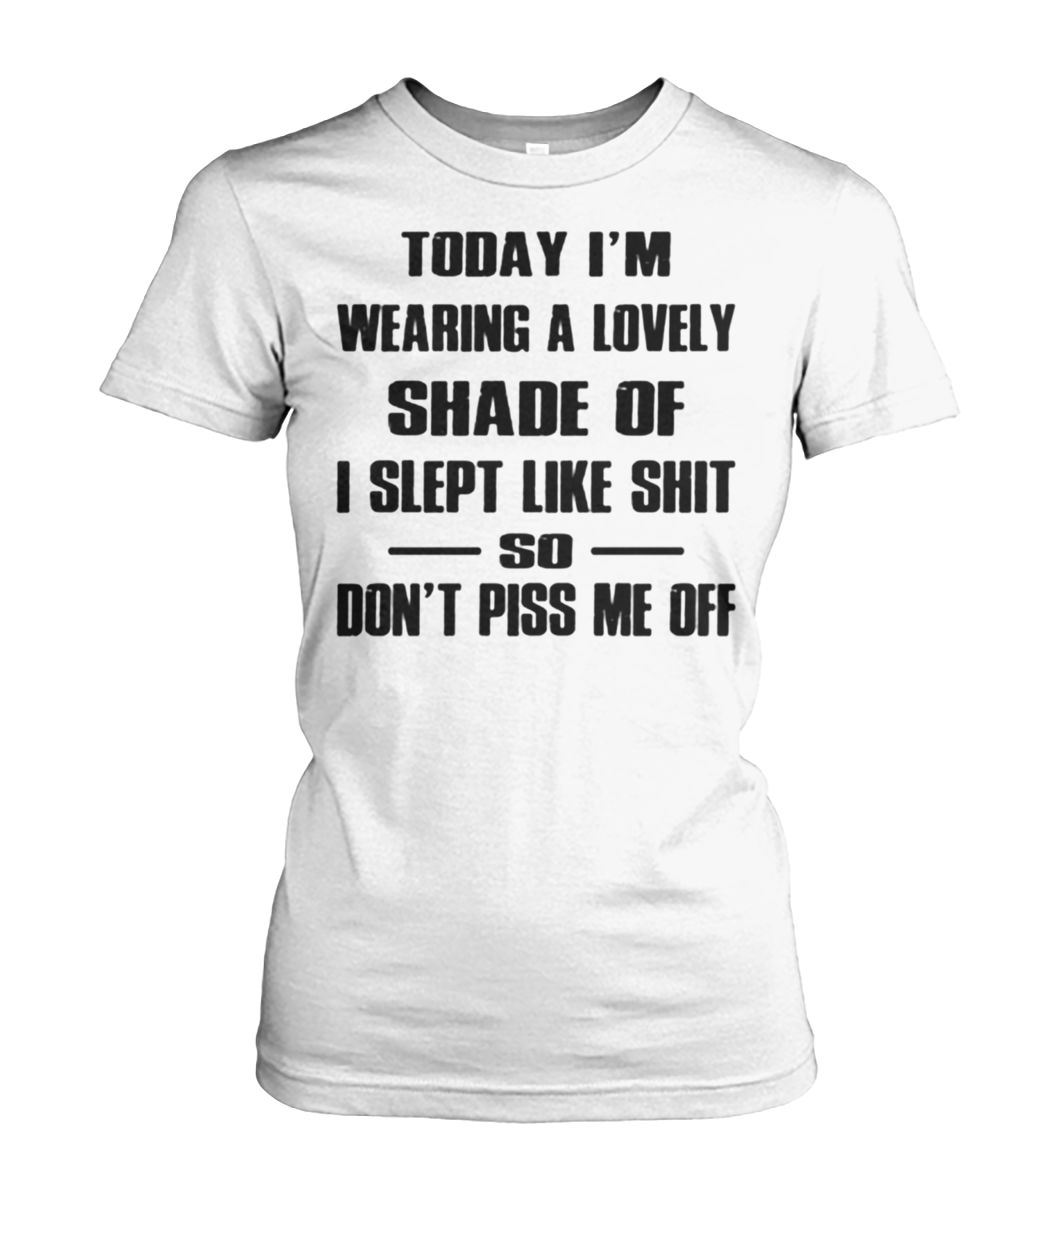 Today I'm wearing a lovely shade of I slept like shit so don't piss me off women's crew tee